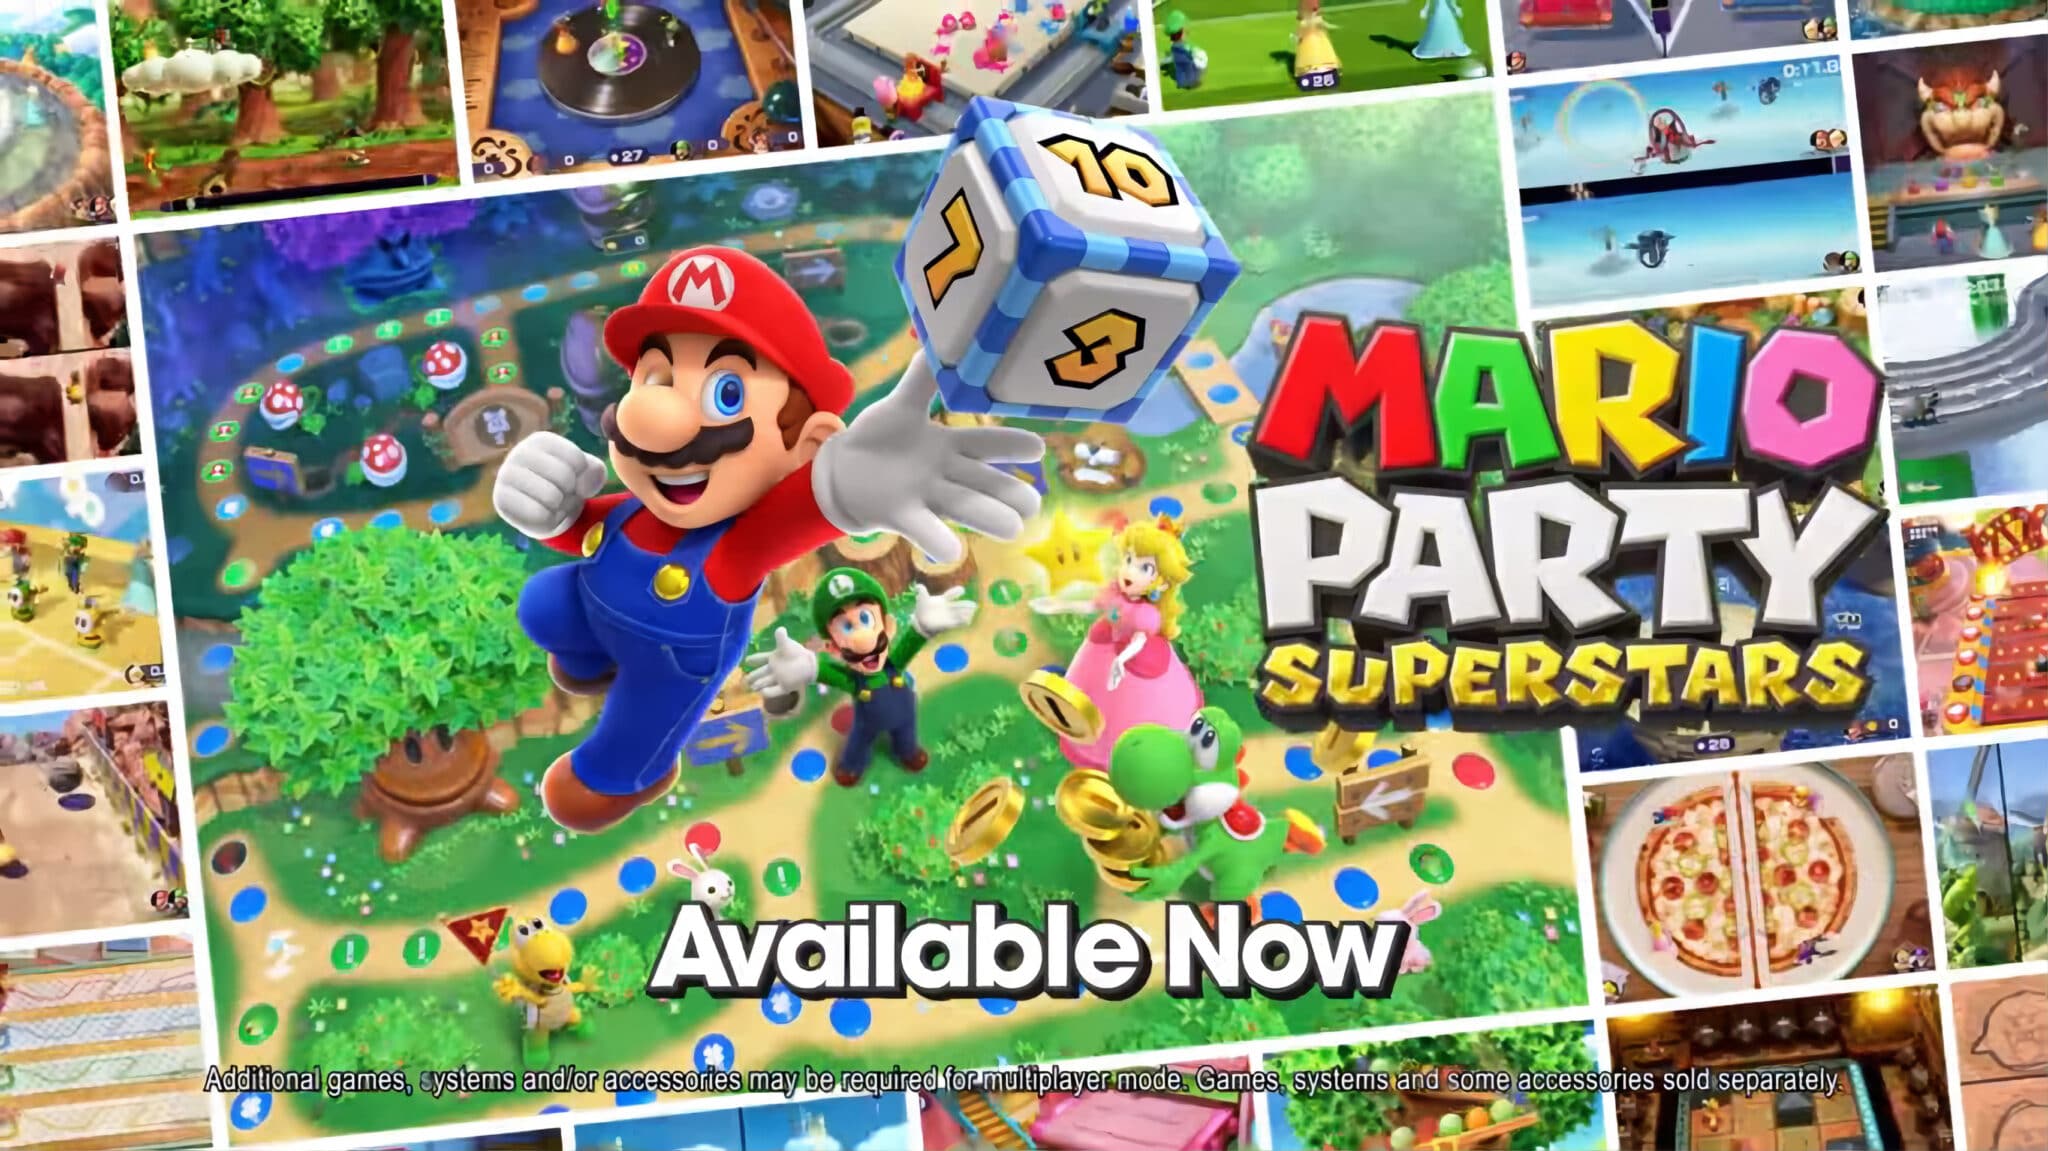 Completely normal Mario Party Superstars trailer